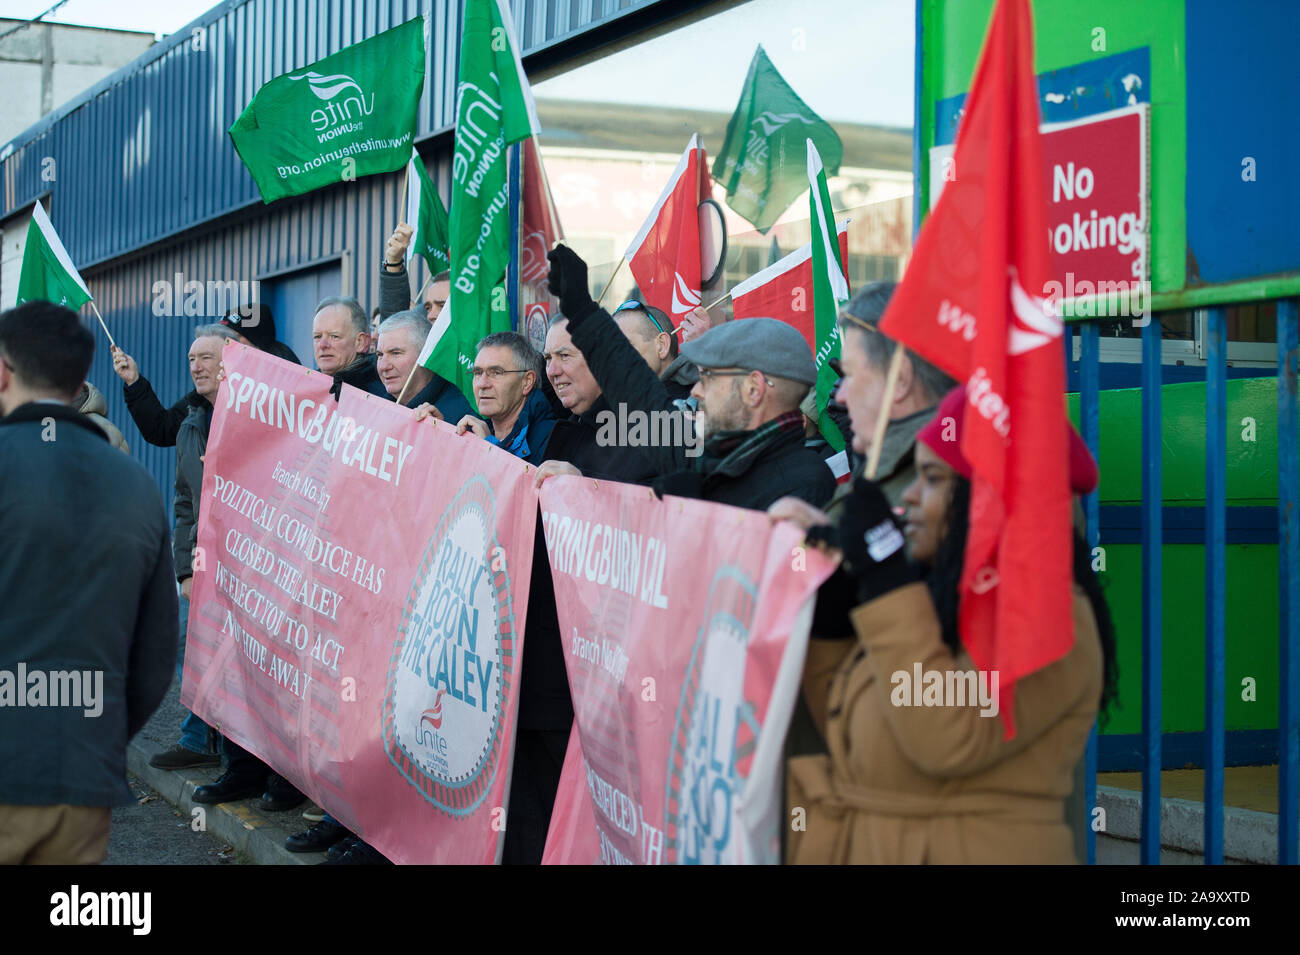 Glasgow, UK. 18th Nov, 2019. Pictured: A Member from Unite and RMT protesting against the closure. Paul Sweeney MP for Glasgow North East, is joined by joined by workers from the Caley Railway Works at the Caley to protest against the closure and highlight the inaction of the Scottish Government to save the site. Credit: Colin Fisher/Alamy Live News Stock Photo